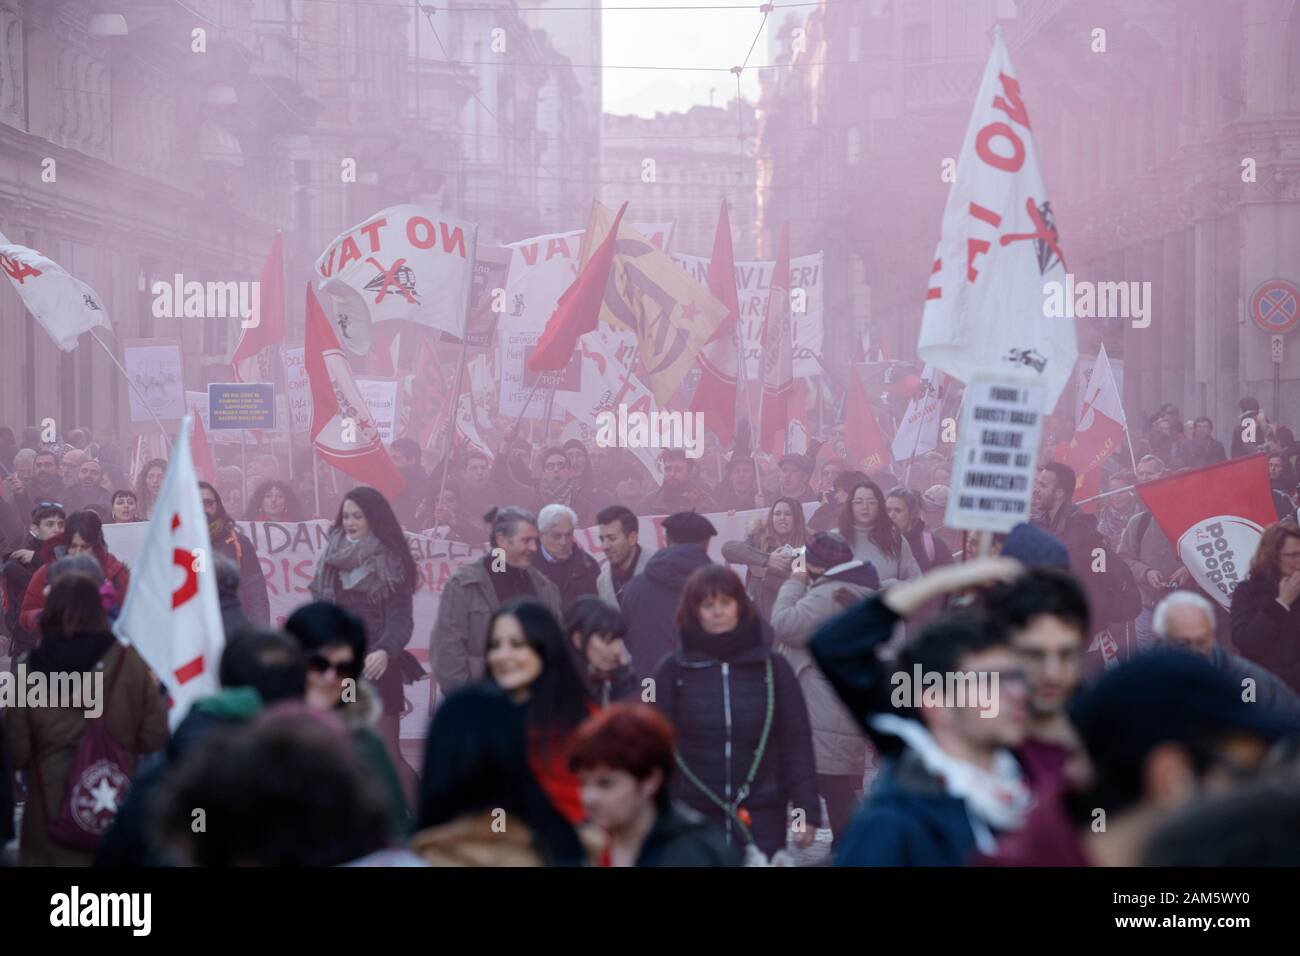 Turin, Italy. 11th Jan, 2020. “No-TAV” (Lyon-Turin railway) activists demonstrate against the imprisonment of 74-year-old Nicoletta Dosio. Credit: MLBARIONA/Alamy Live News Stock Photo